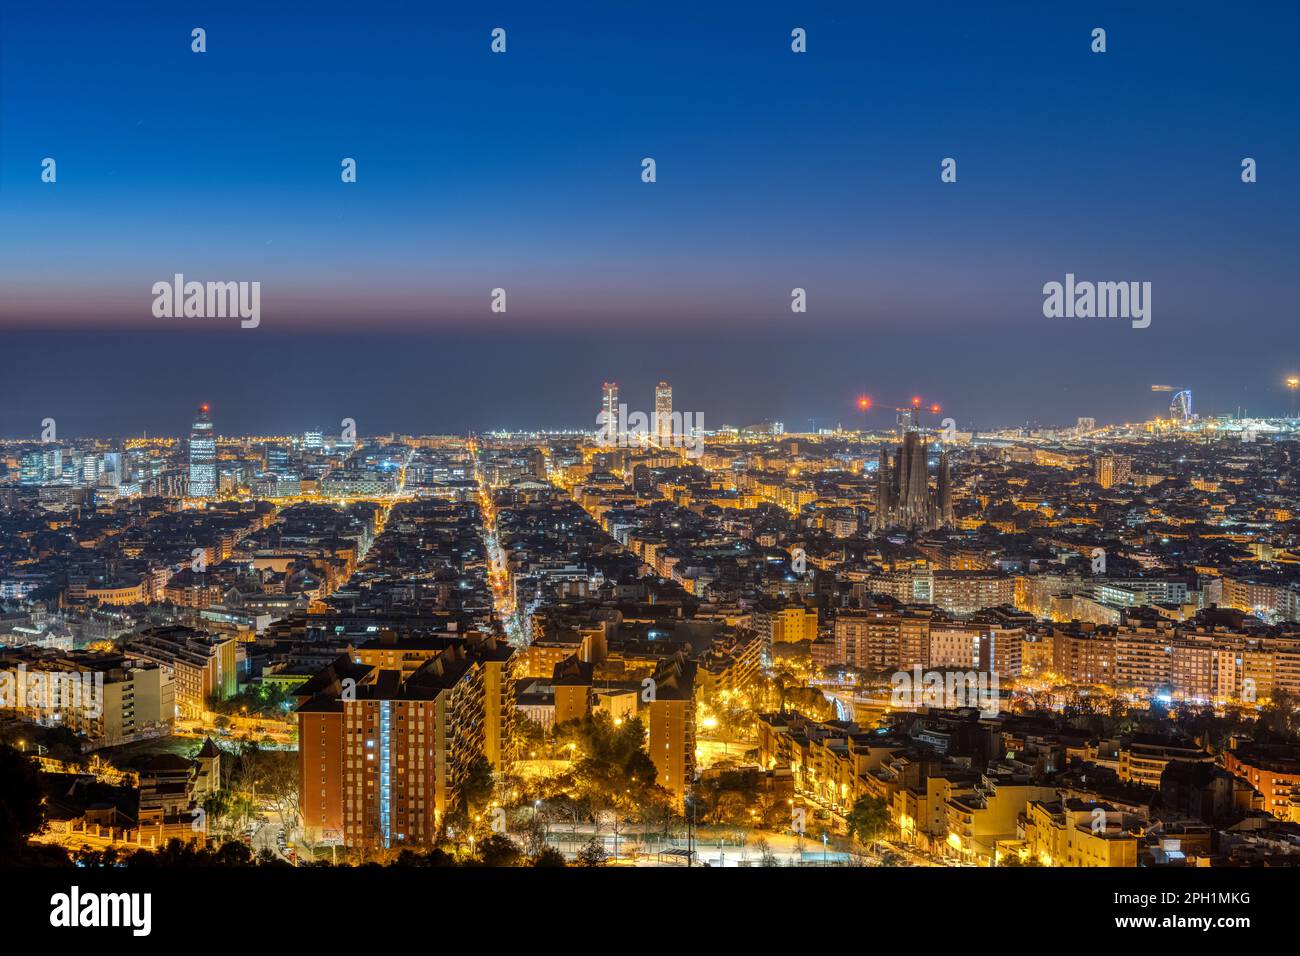 View of downtown Barcelona in Spain at night Stock Photo